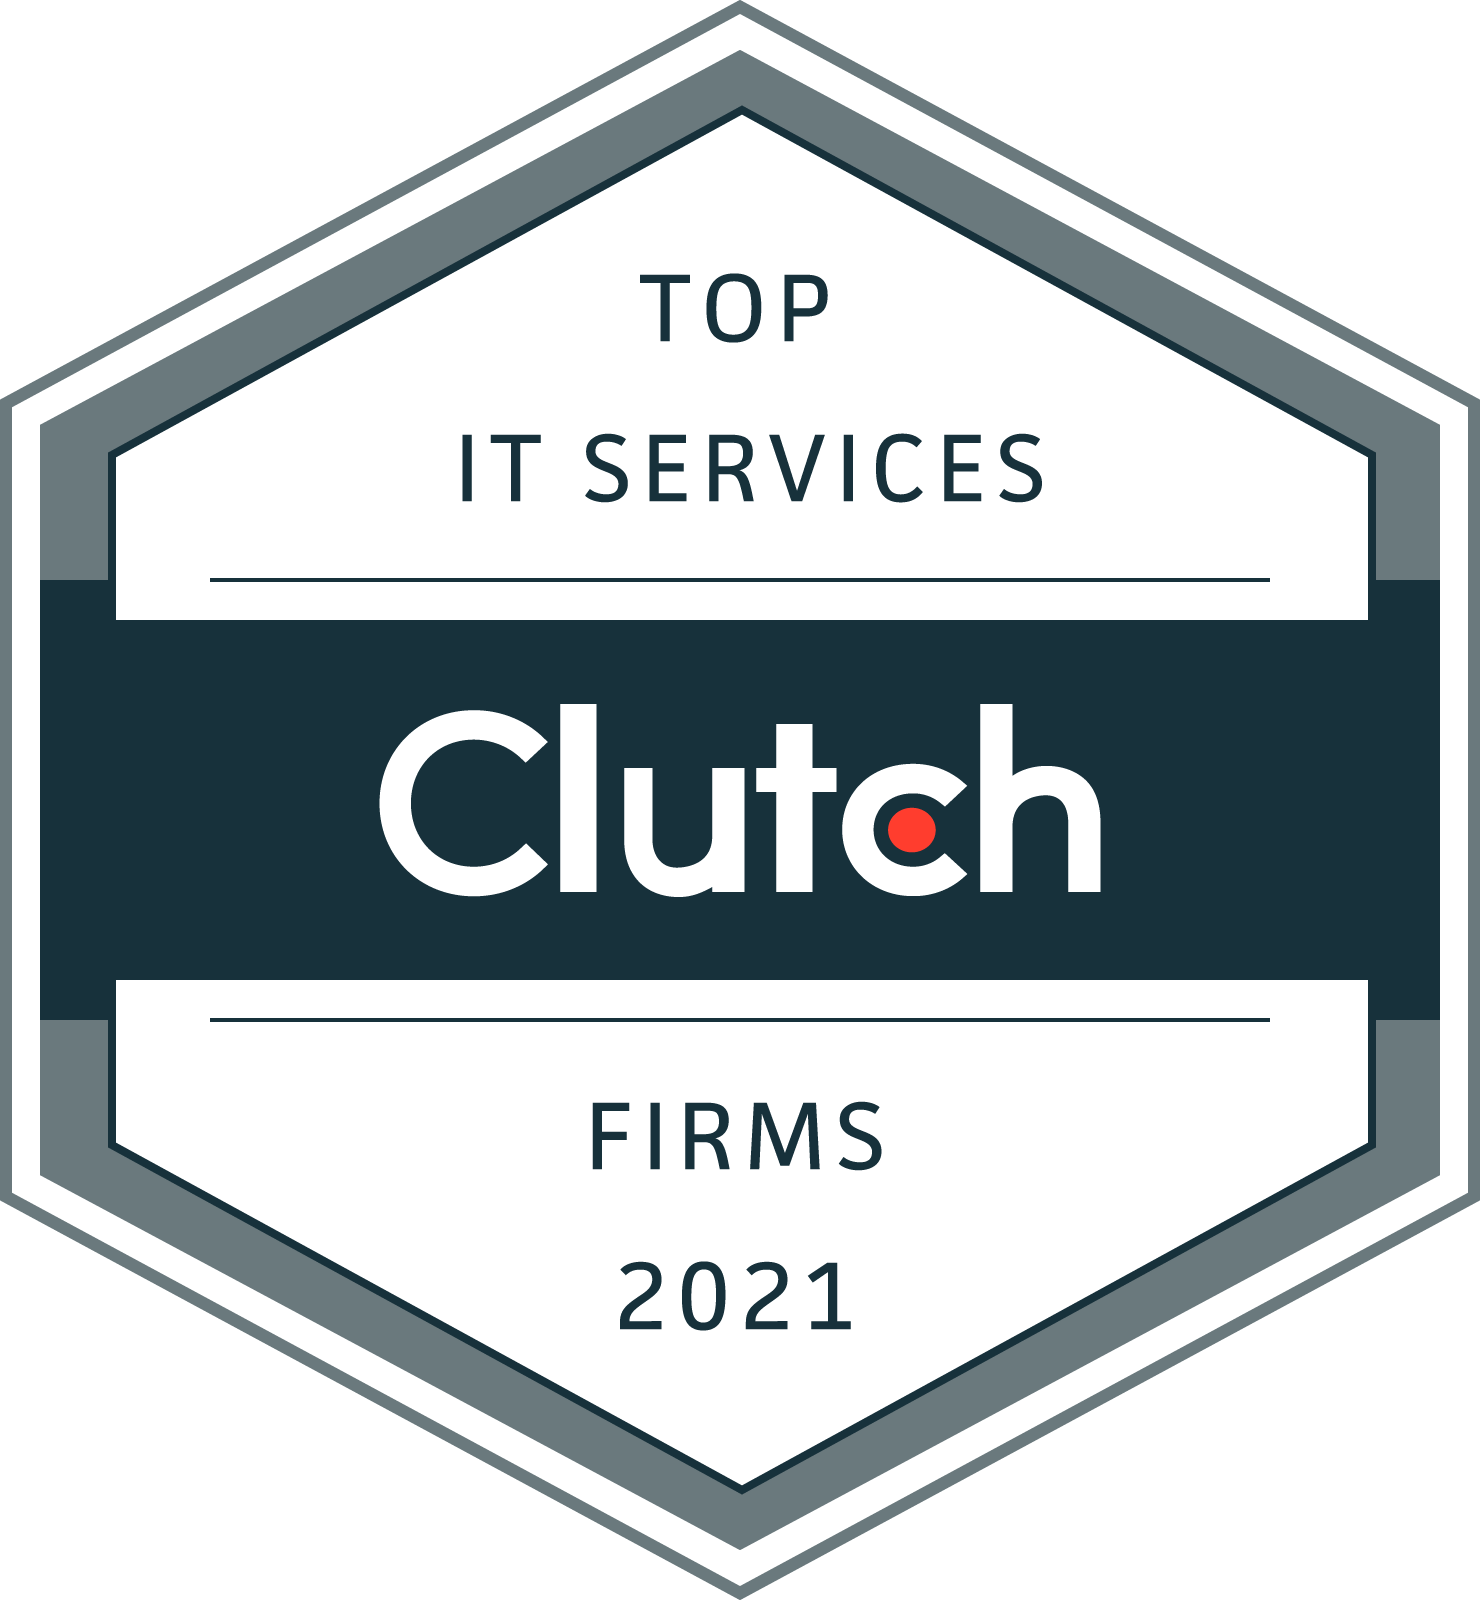 Top IT Services Firm